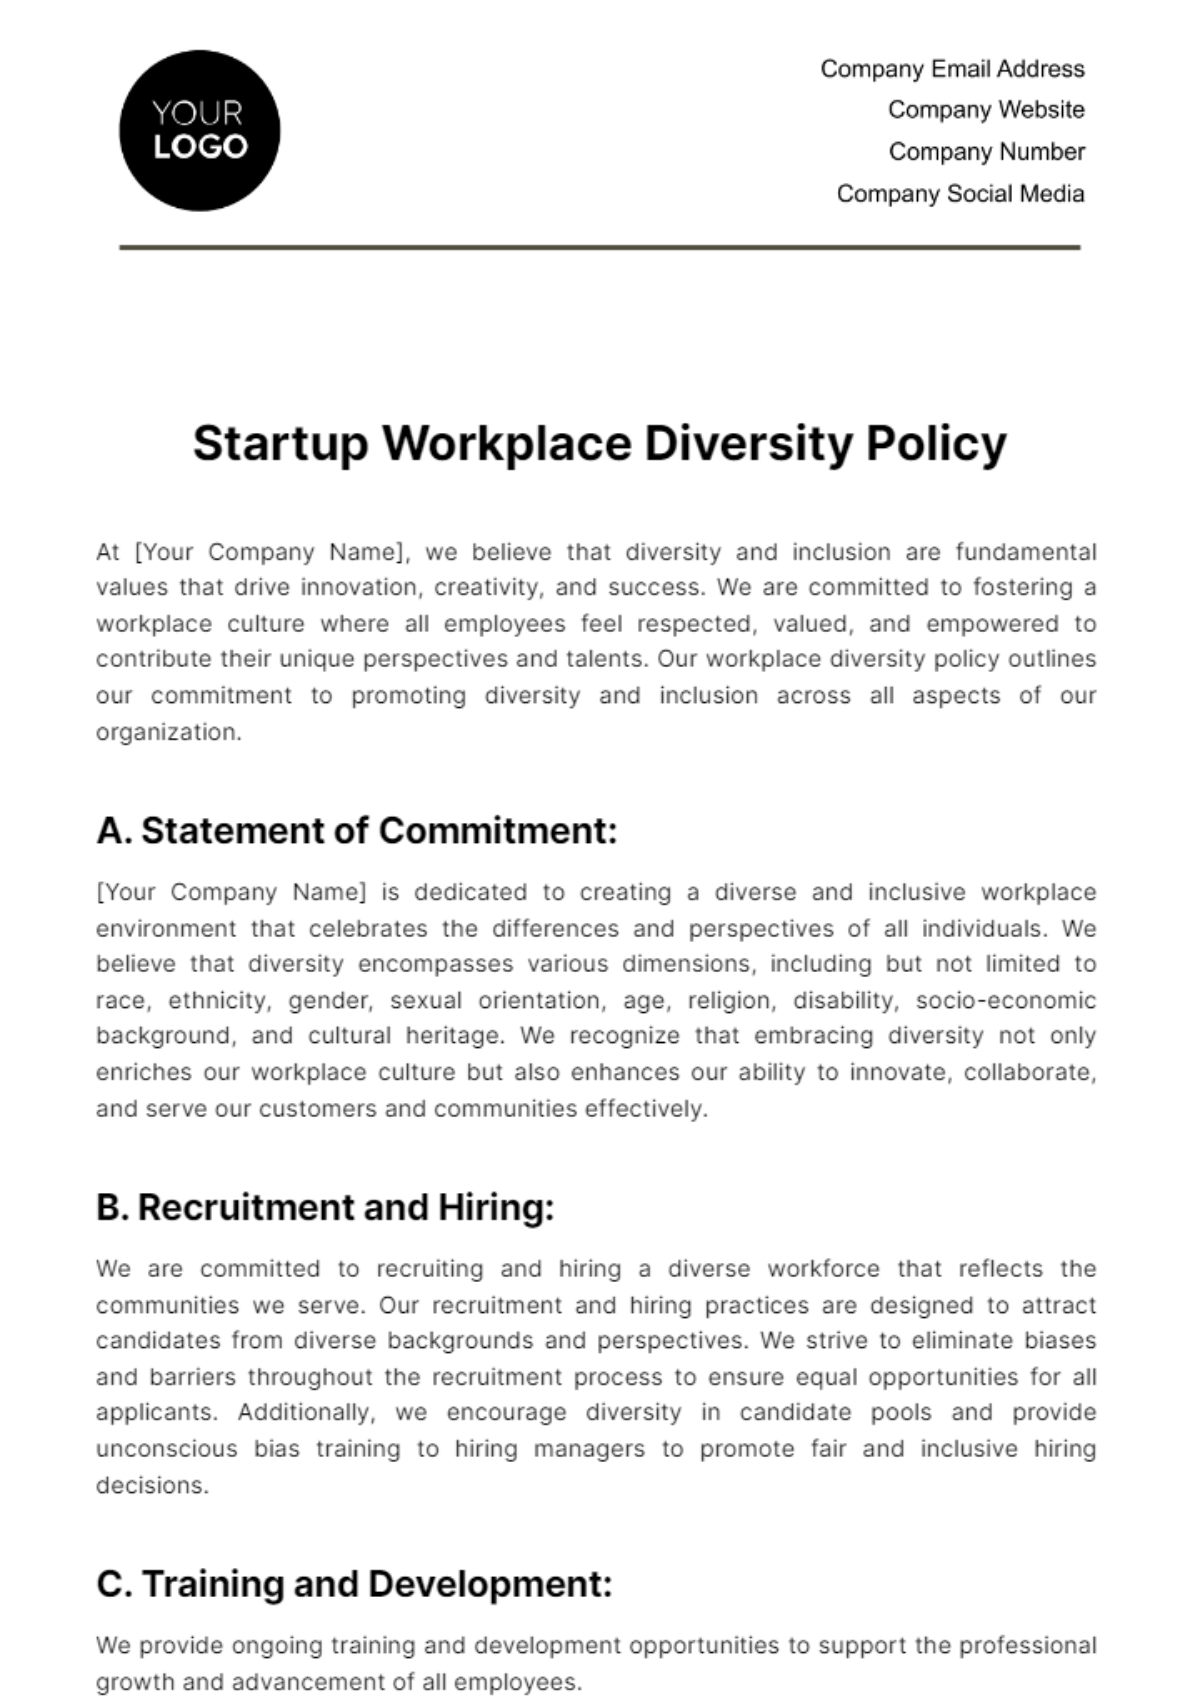 Startup Workplace Diversity Policy Template